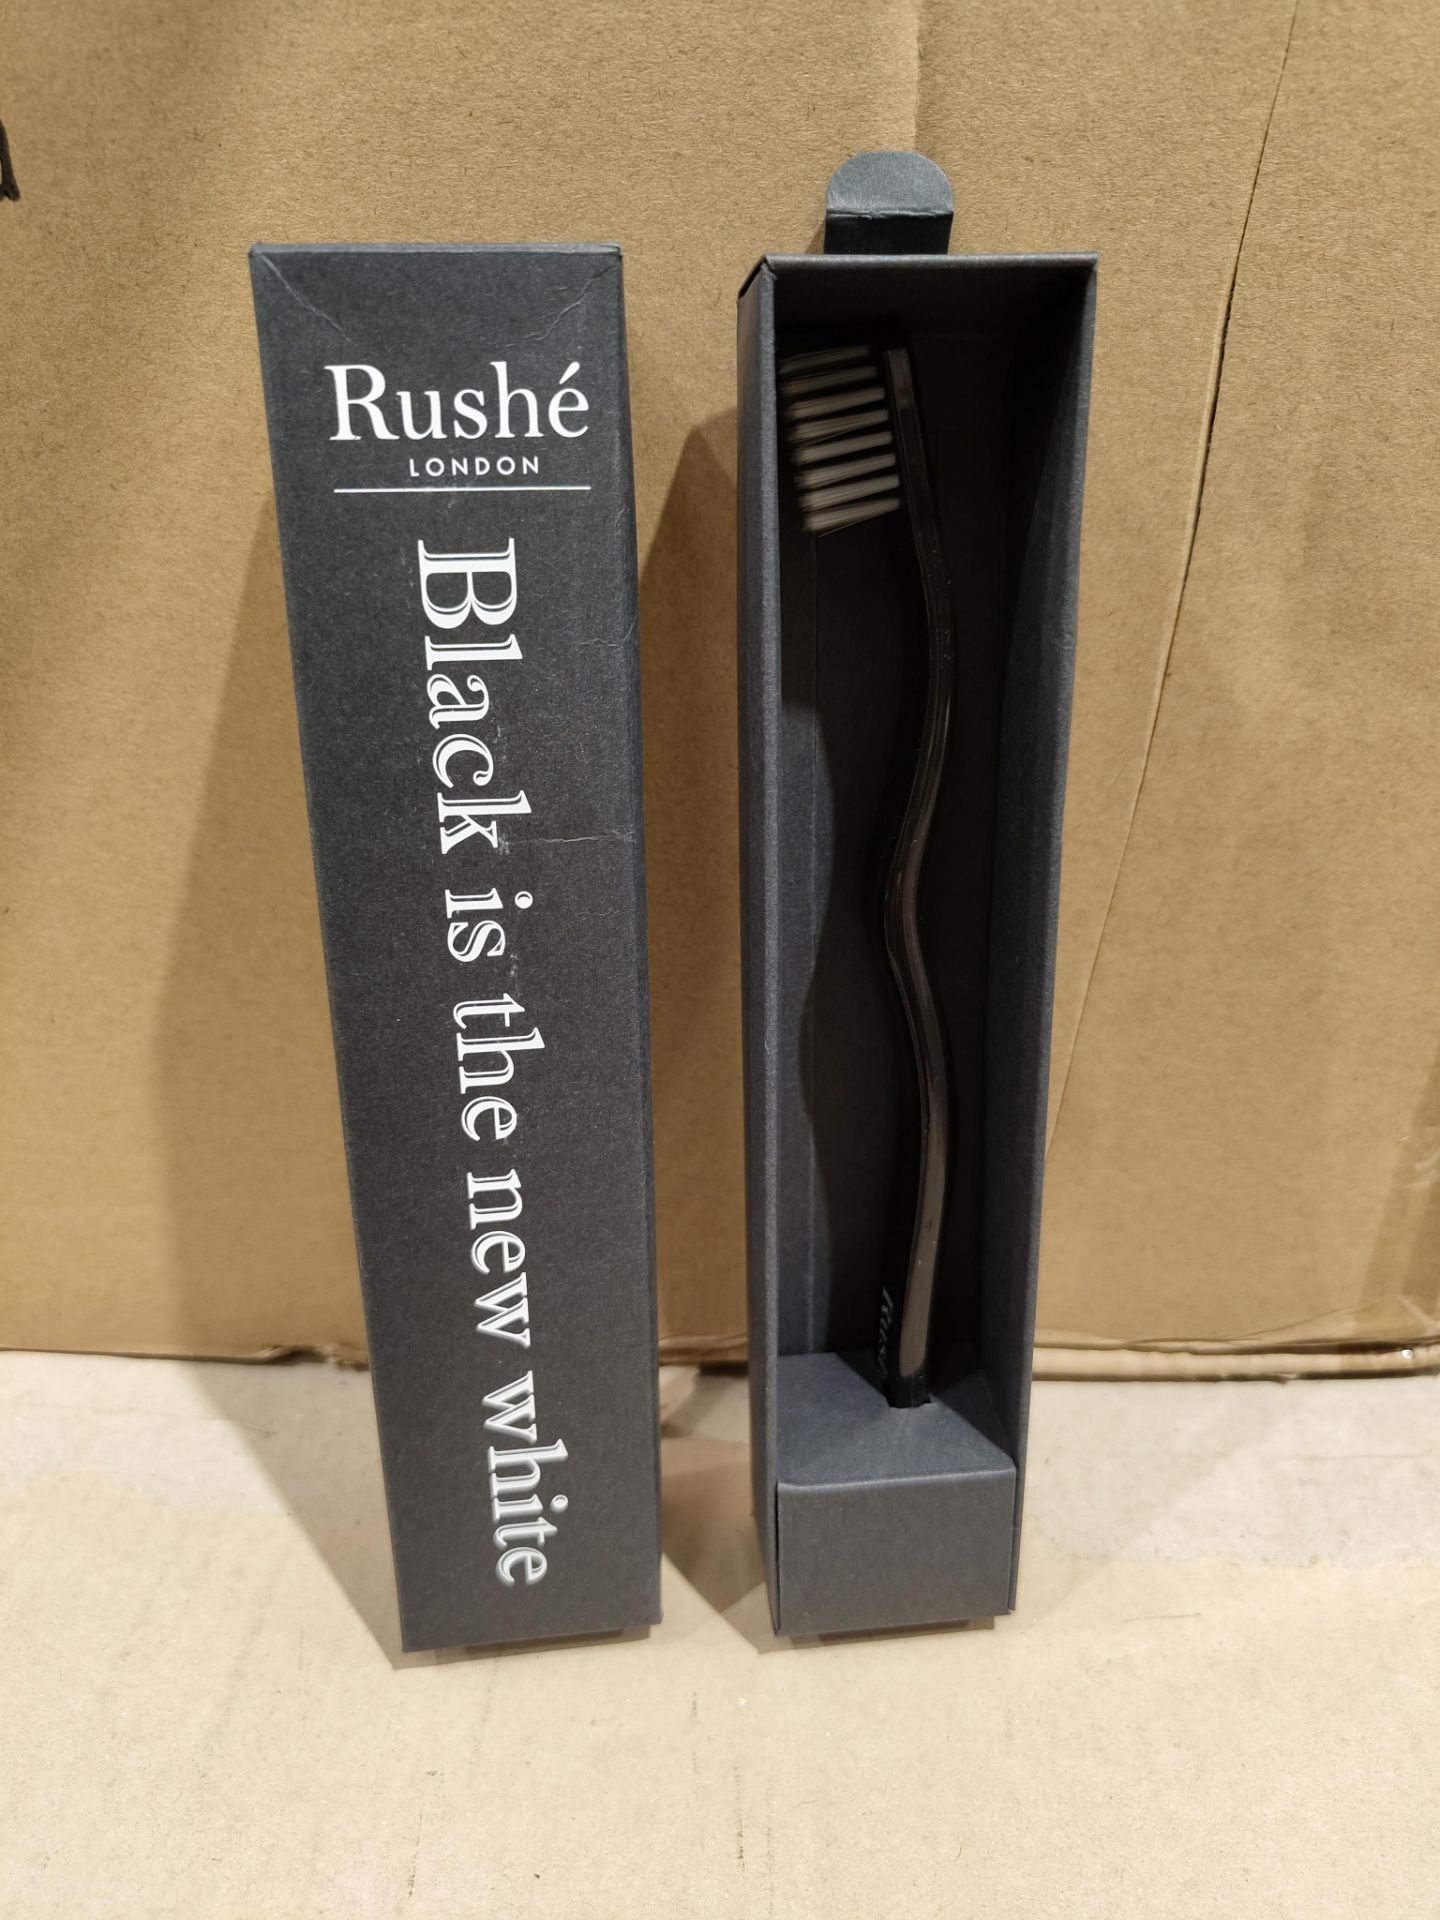 1000 X BRAND NEW RUSHE LONDON BLACK IS THE NEW WHITE TOOTHBRUSHES RRP £7 EACH S1